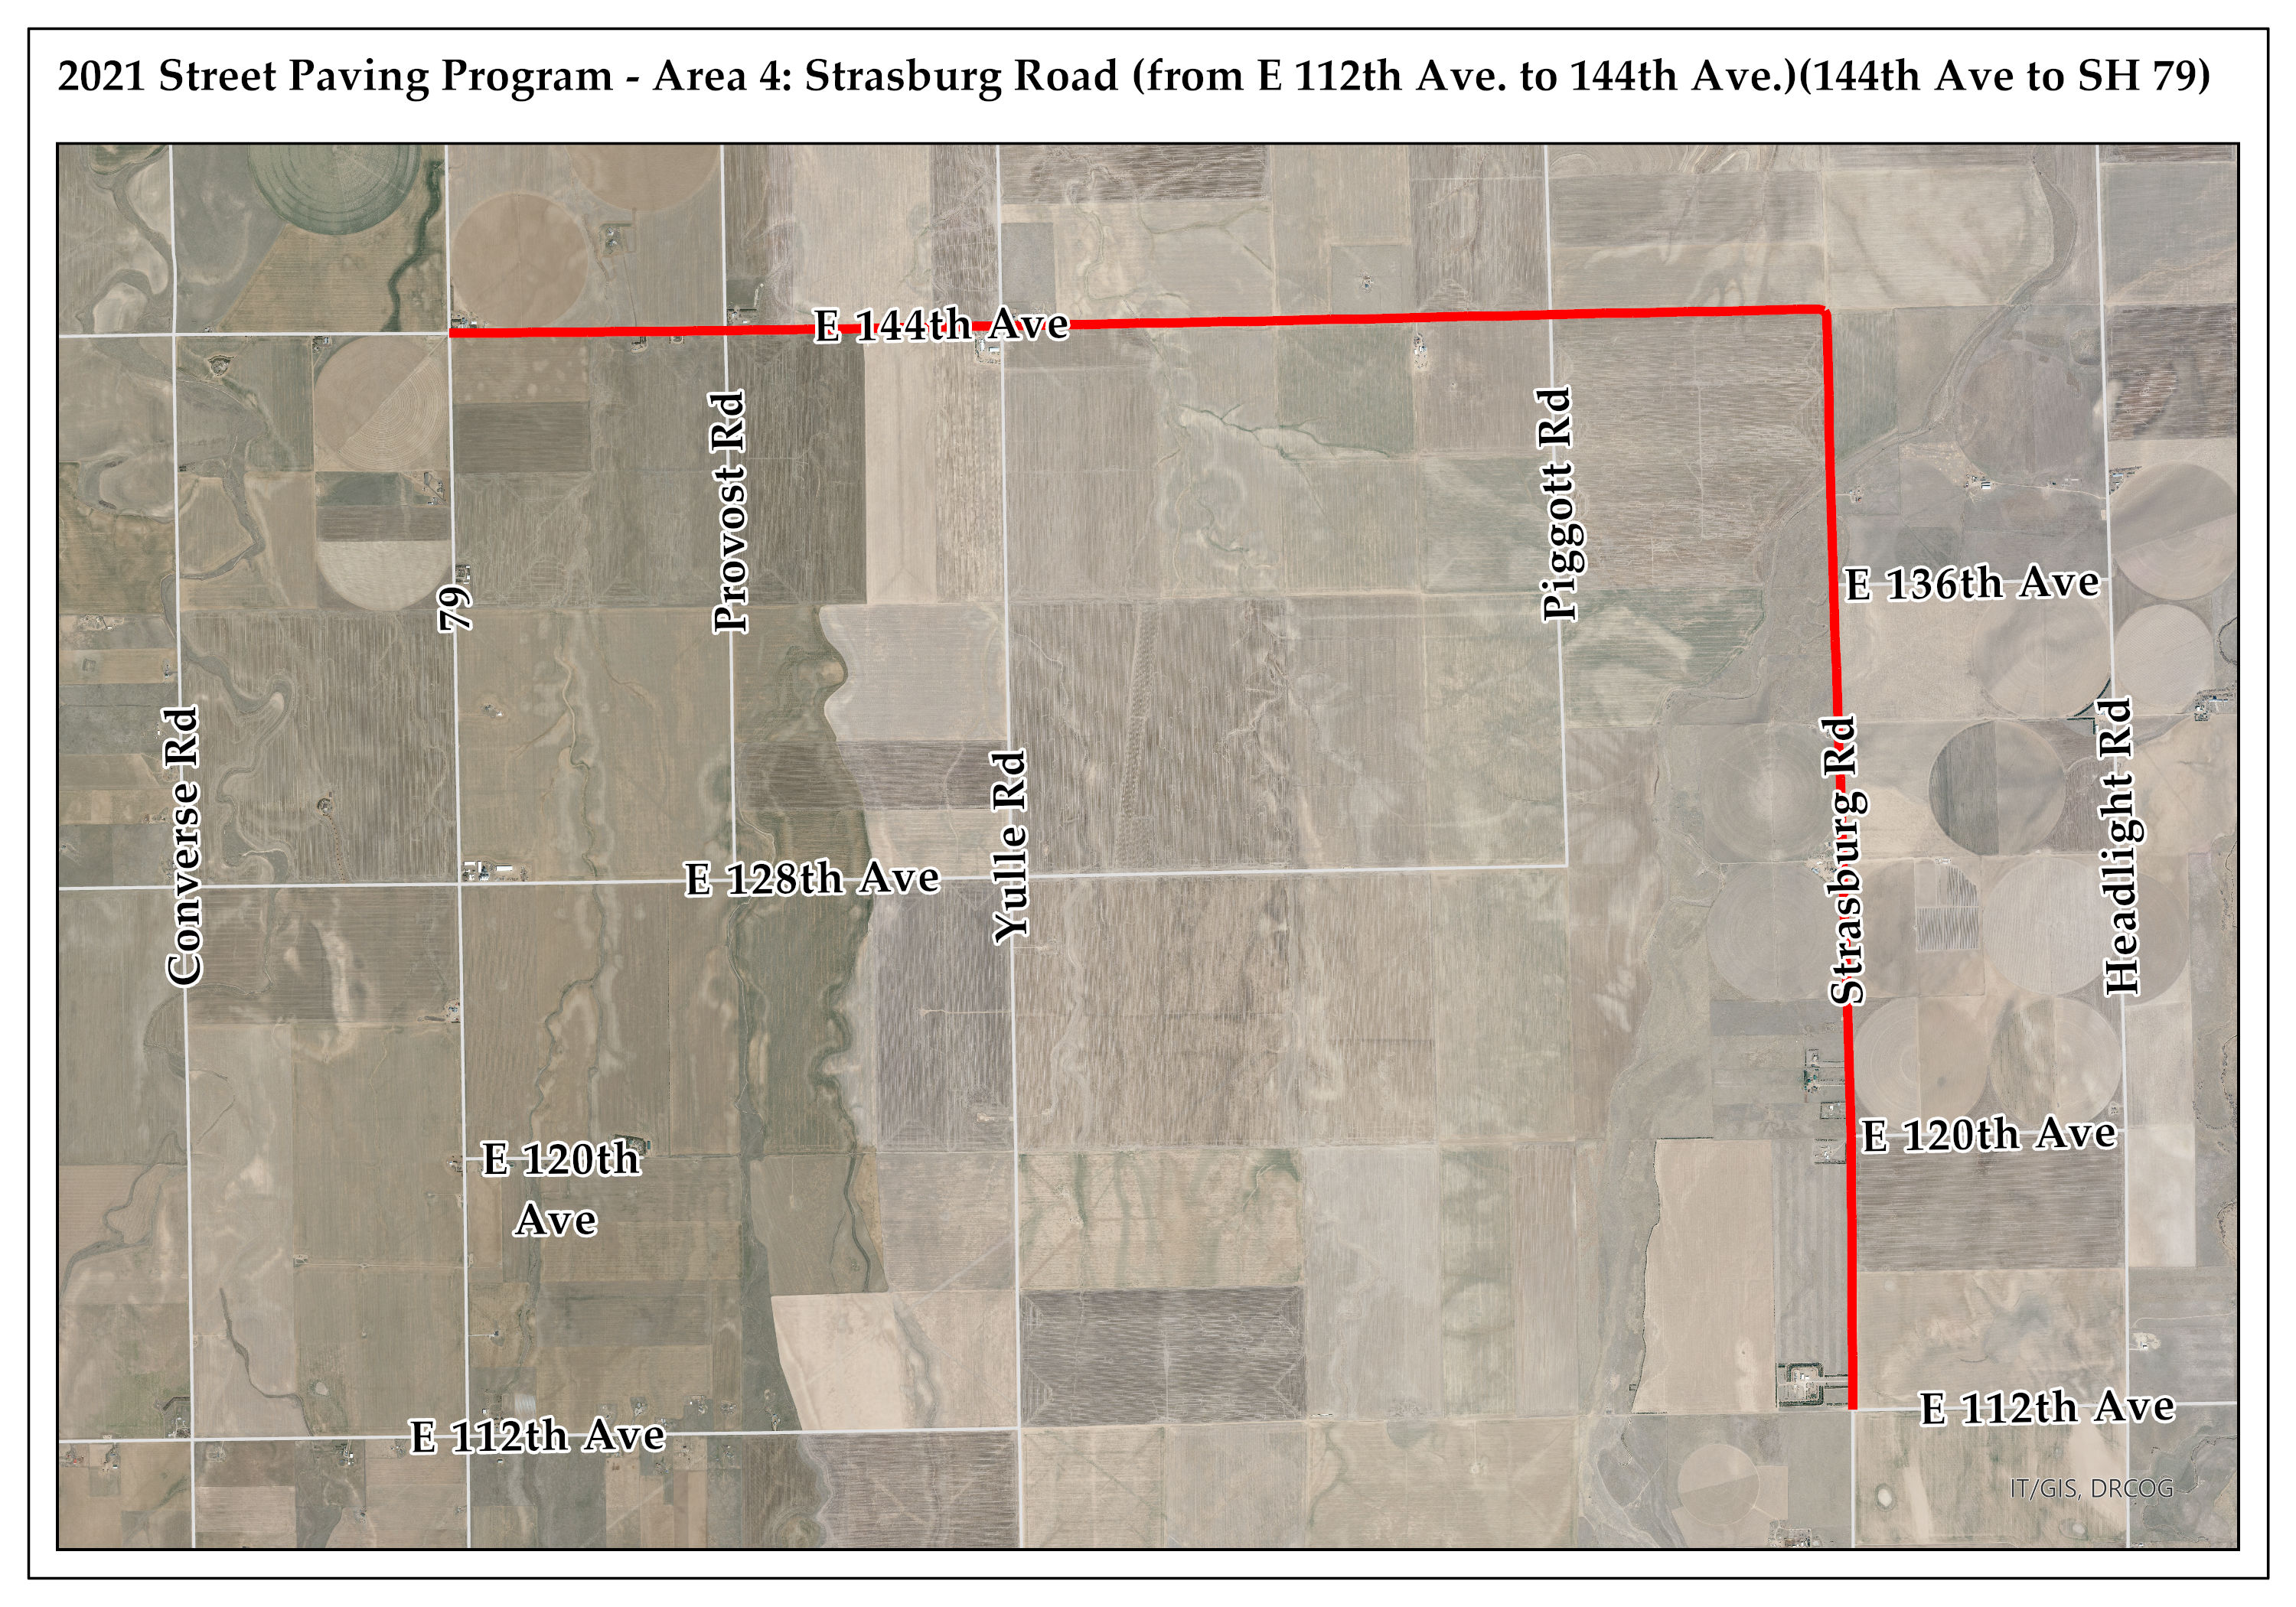 Area 4 – Strasburg Rd. from E. 112th Ave. to 144th Ave. - 144th Ave. to SH 79